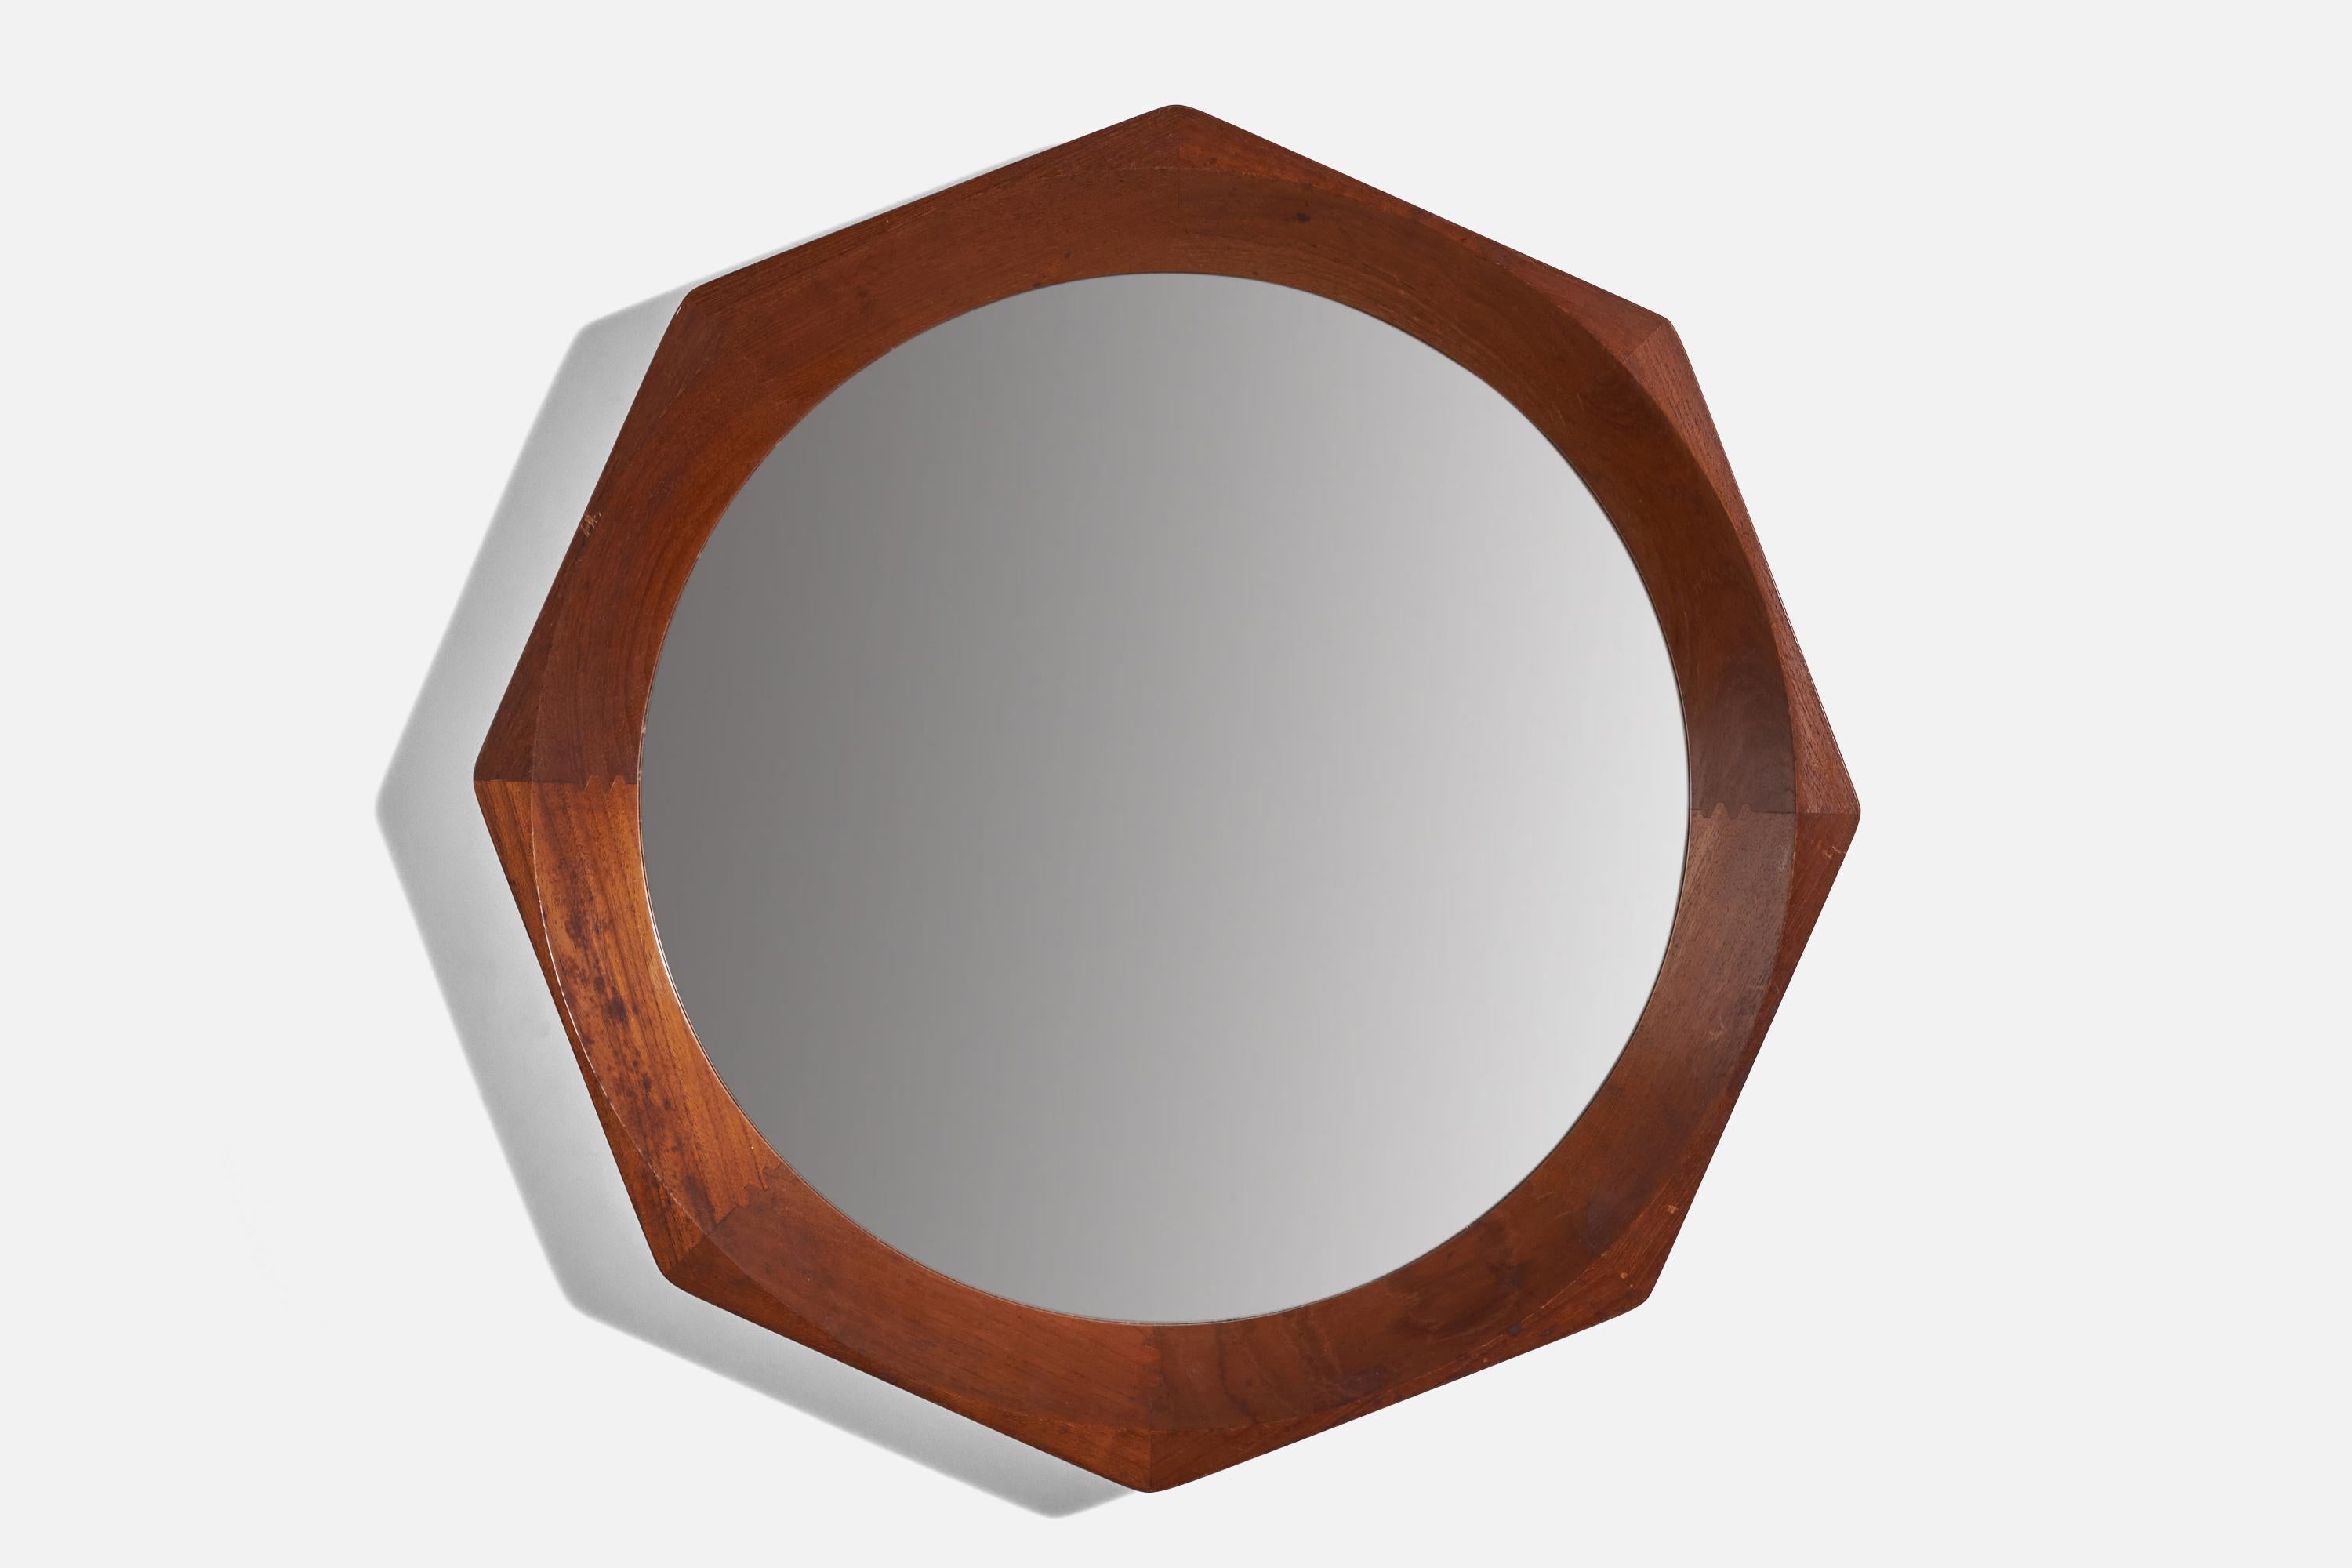 A Danish rosewood mirror. Designed and produced in Denmark, 1950s. Features a sculptural Octagonal rosewood frame, original mirror glass.

Stamped 